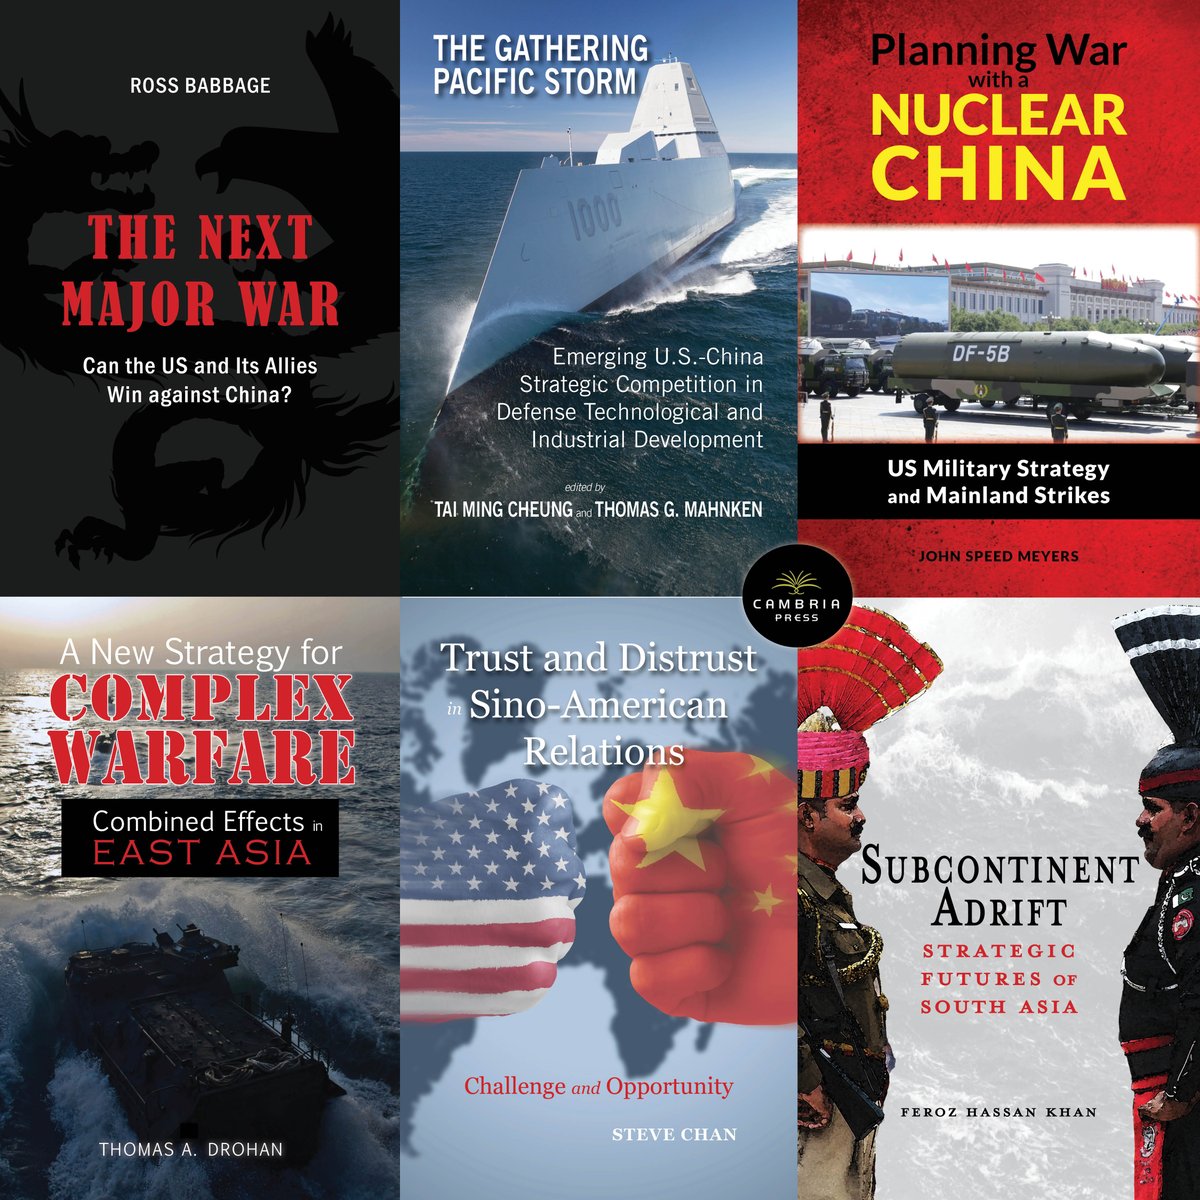 Must-read titles on Asia in the Cambria Conflict and Security Studies book series, headed by Dr. Thomas G. Mahnken ow.ly/hXUG50Rqfxf